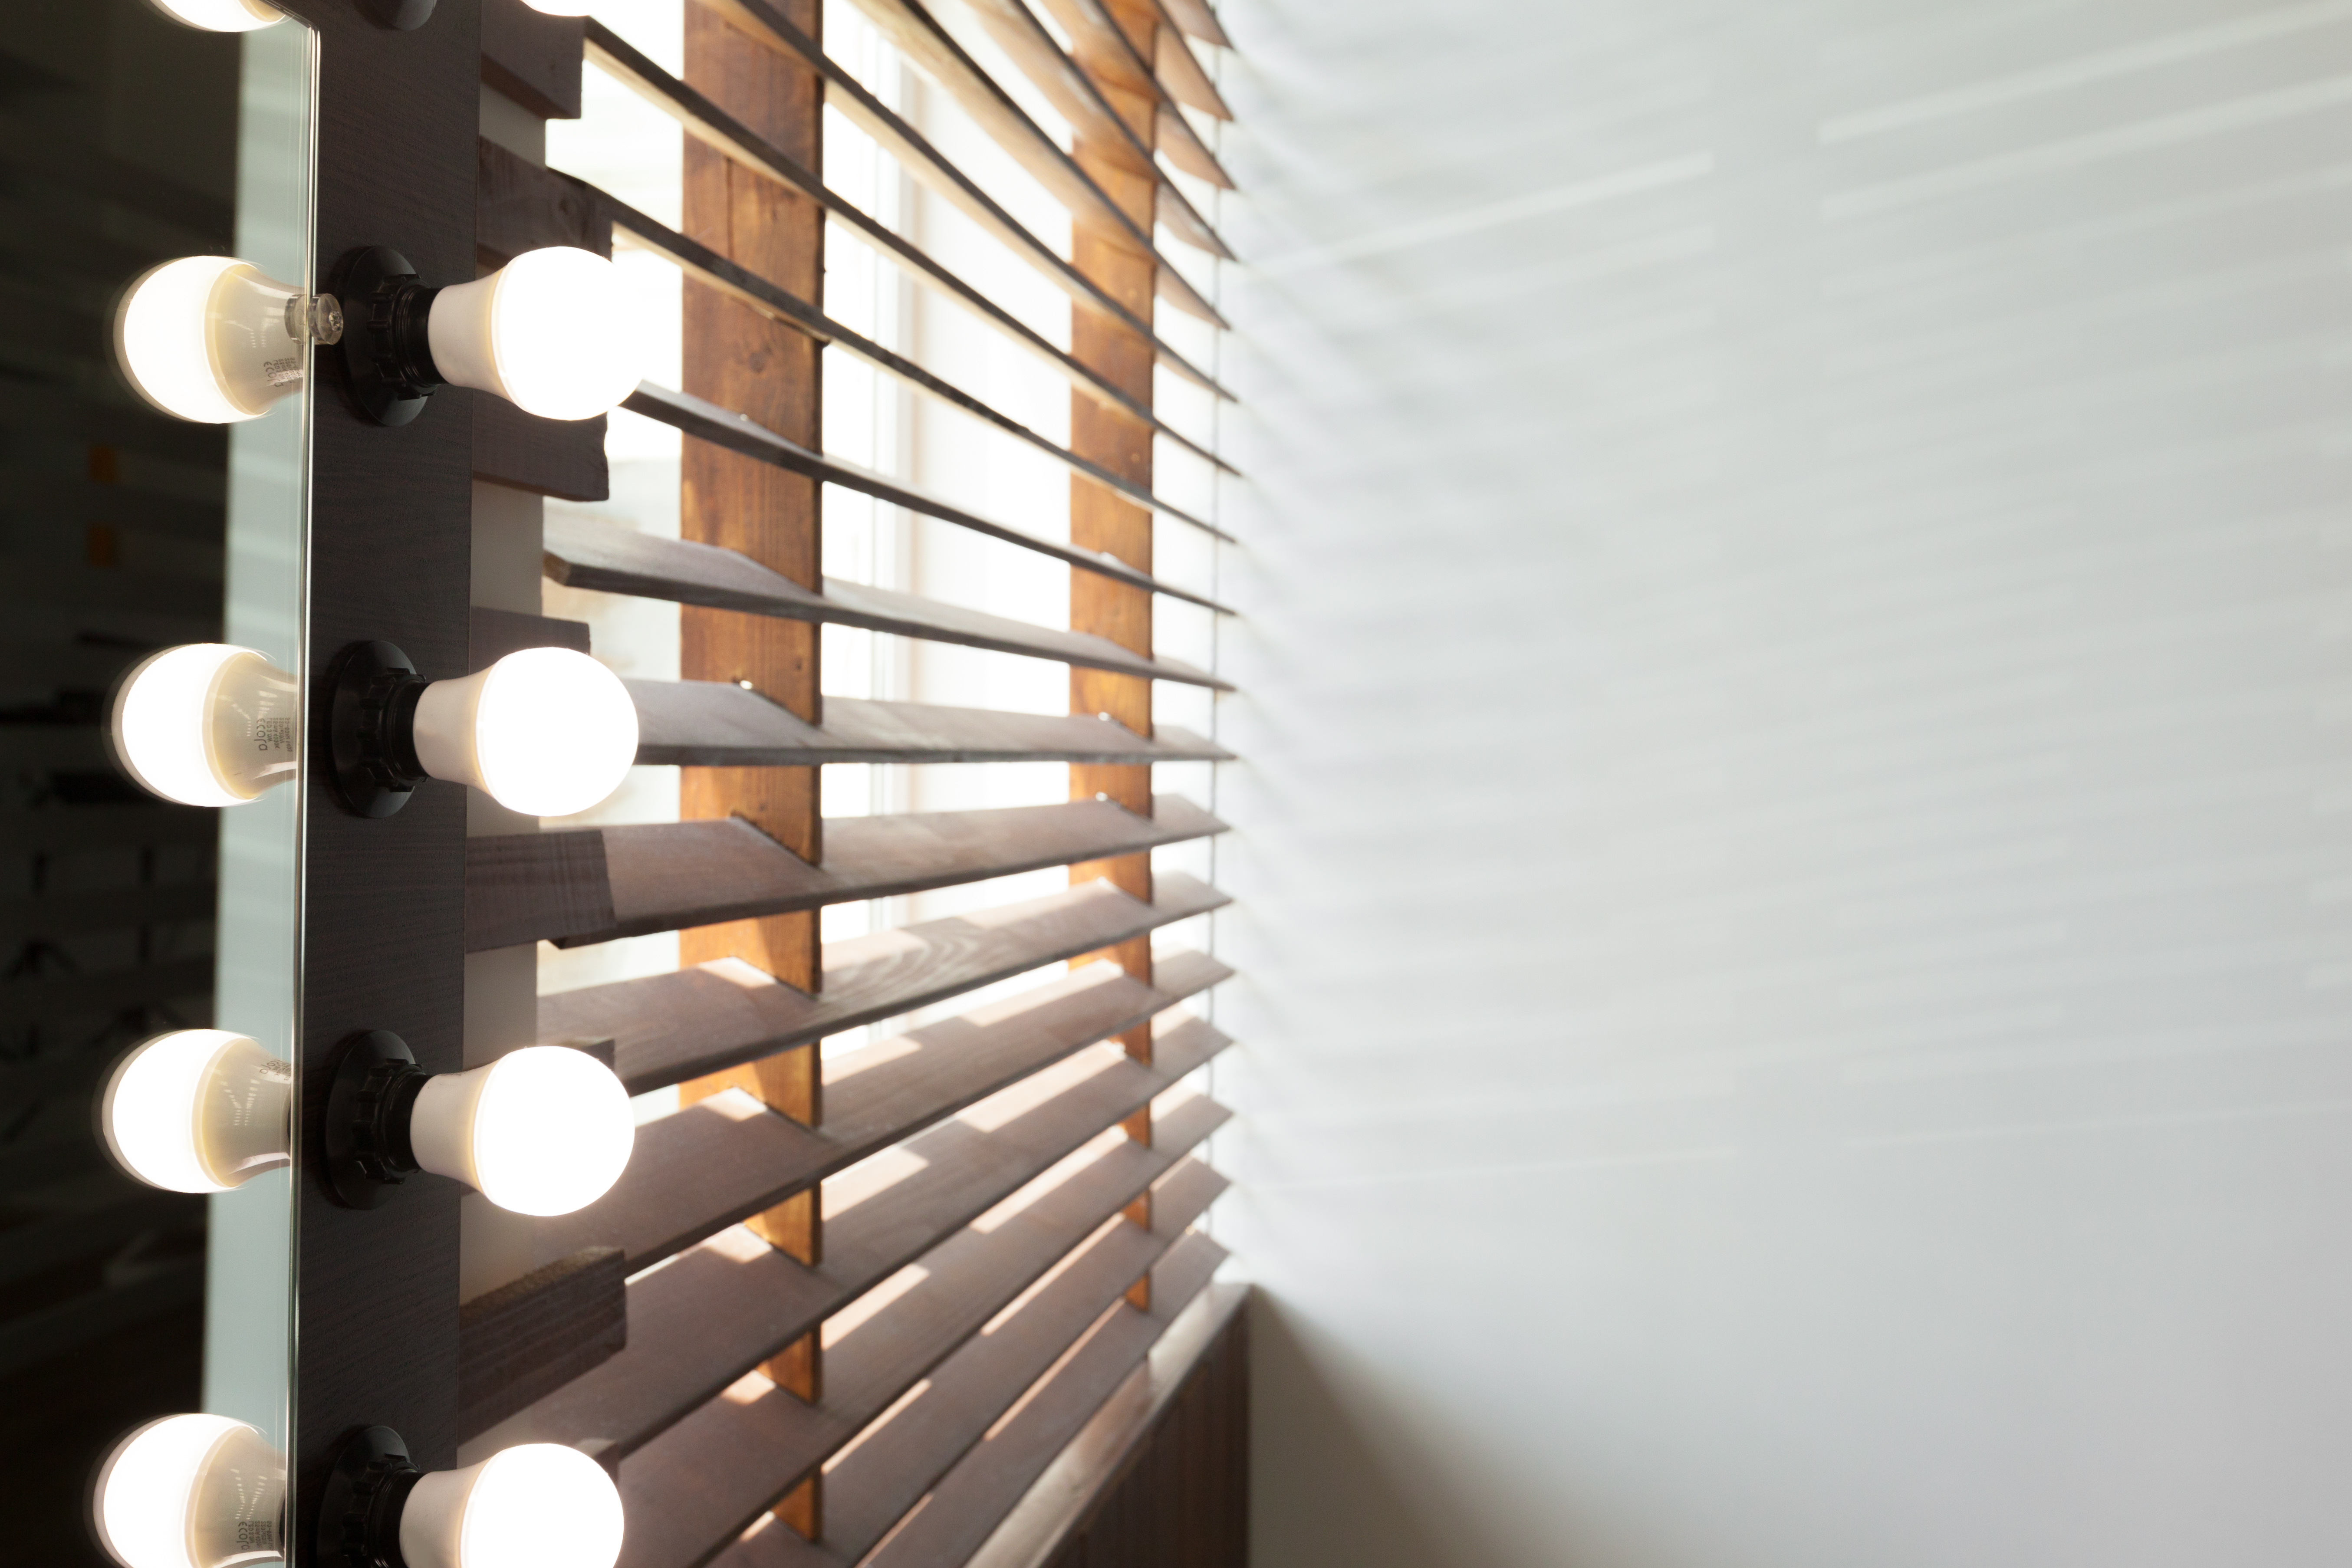 Wooden blinds with sun light in a house room